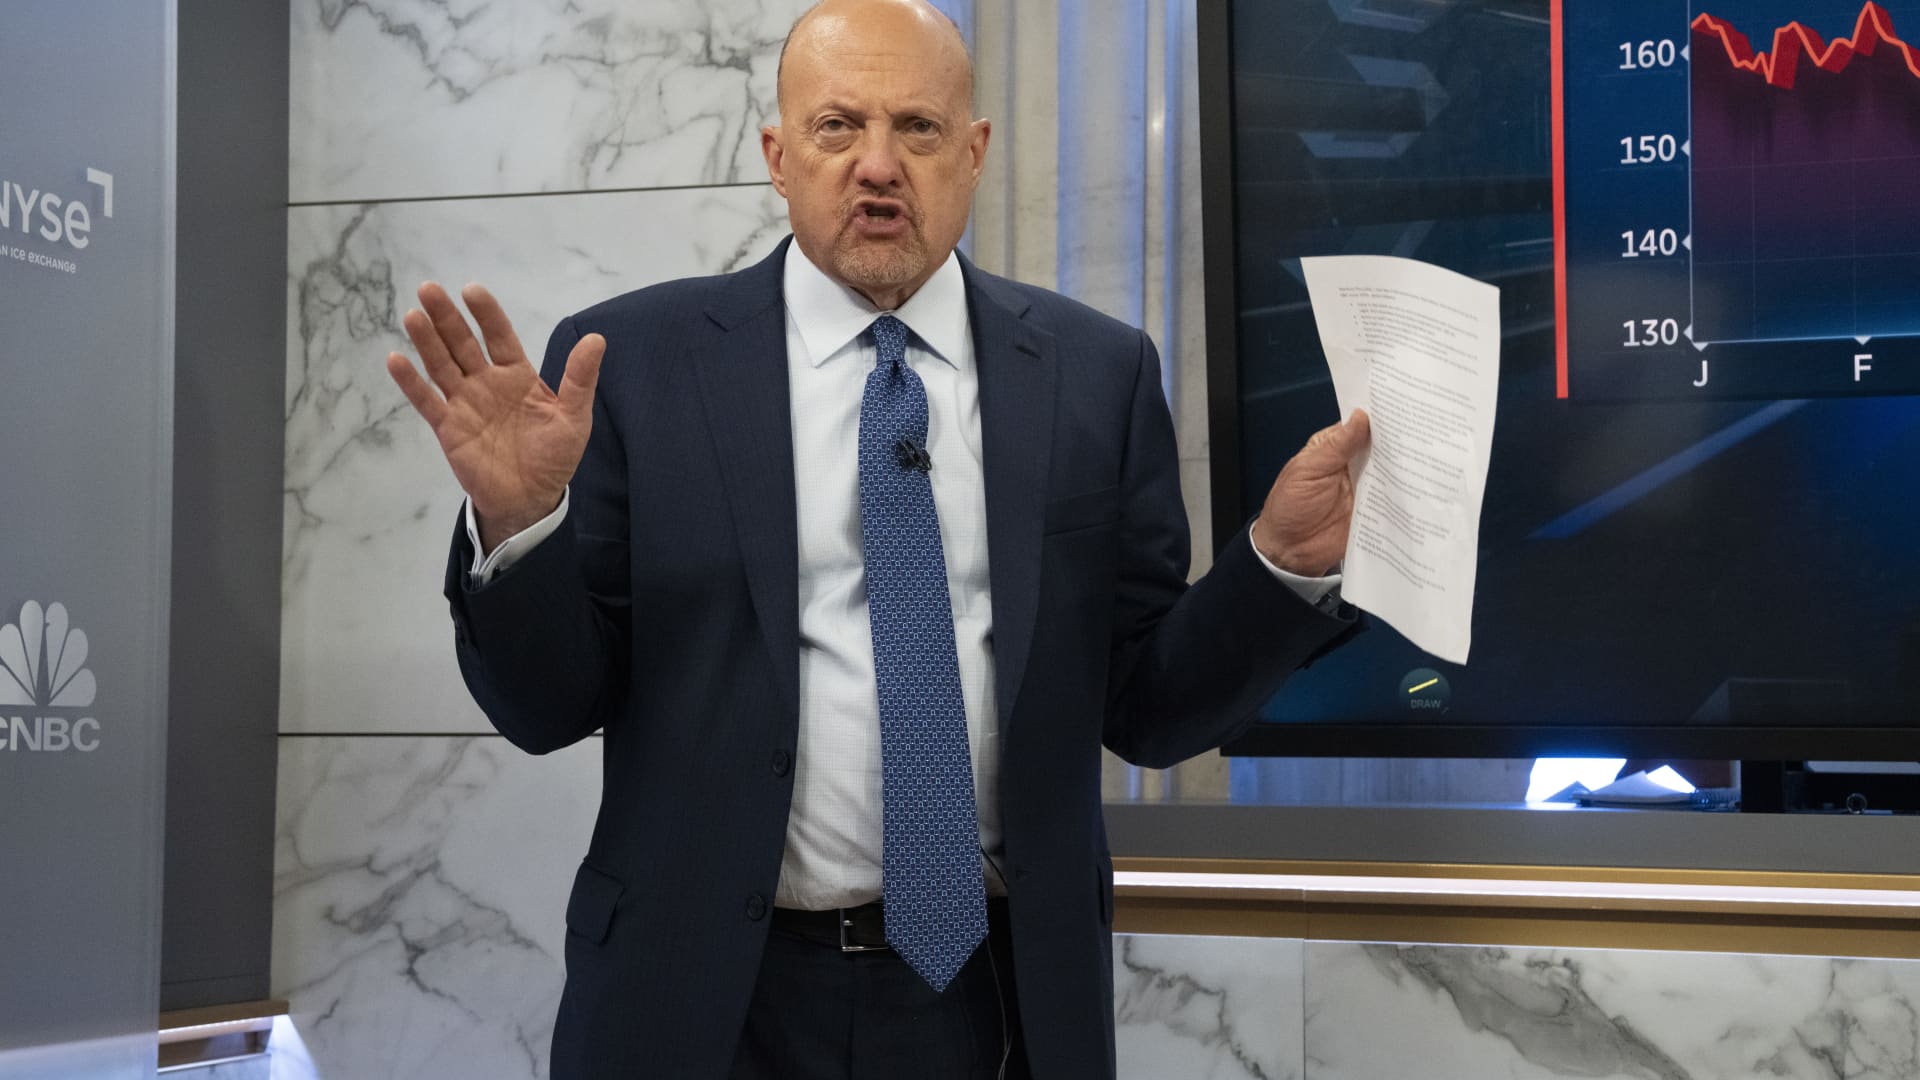 Jim Cramer’s Investing Club meeting Friday: Be selective buying in this market